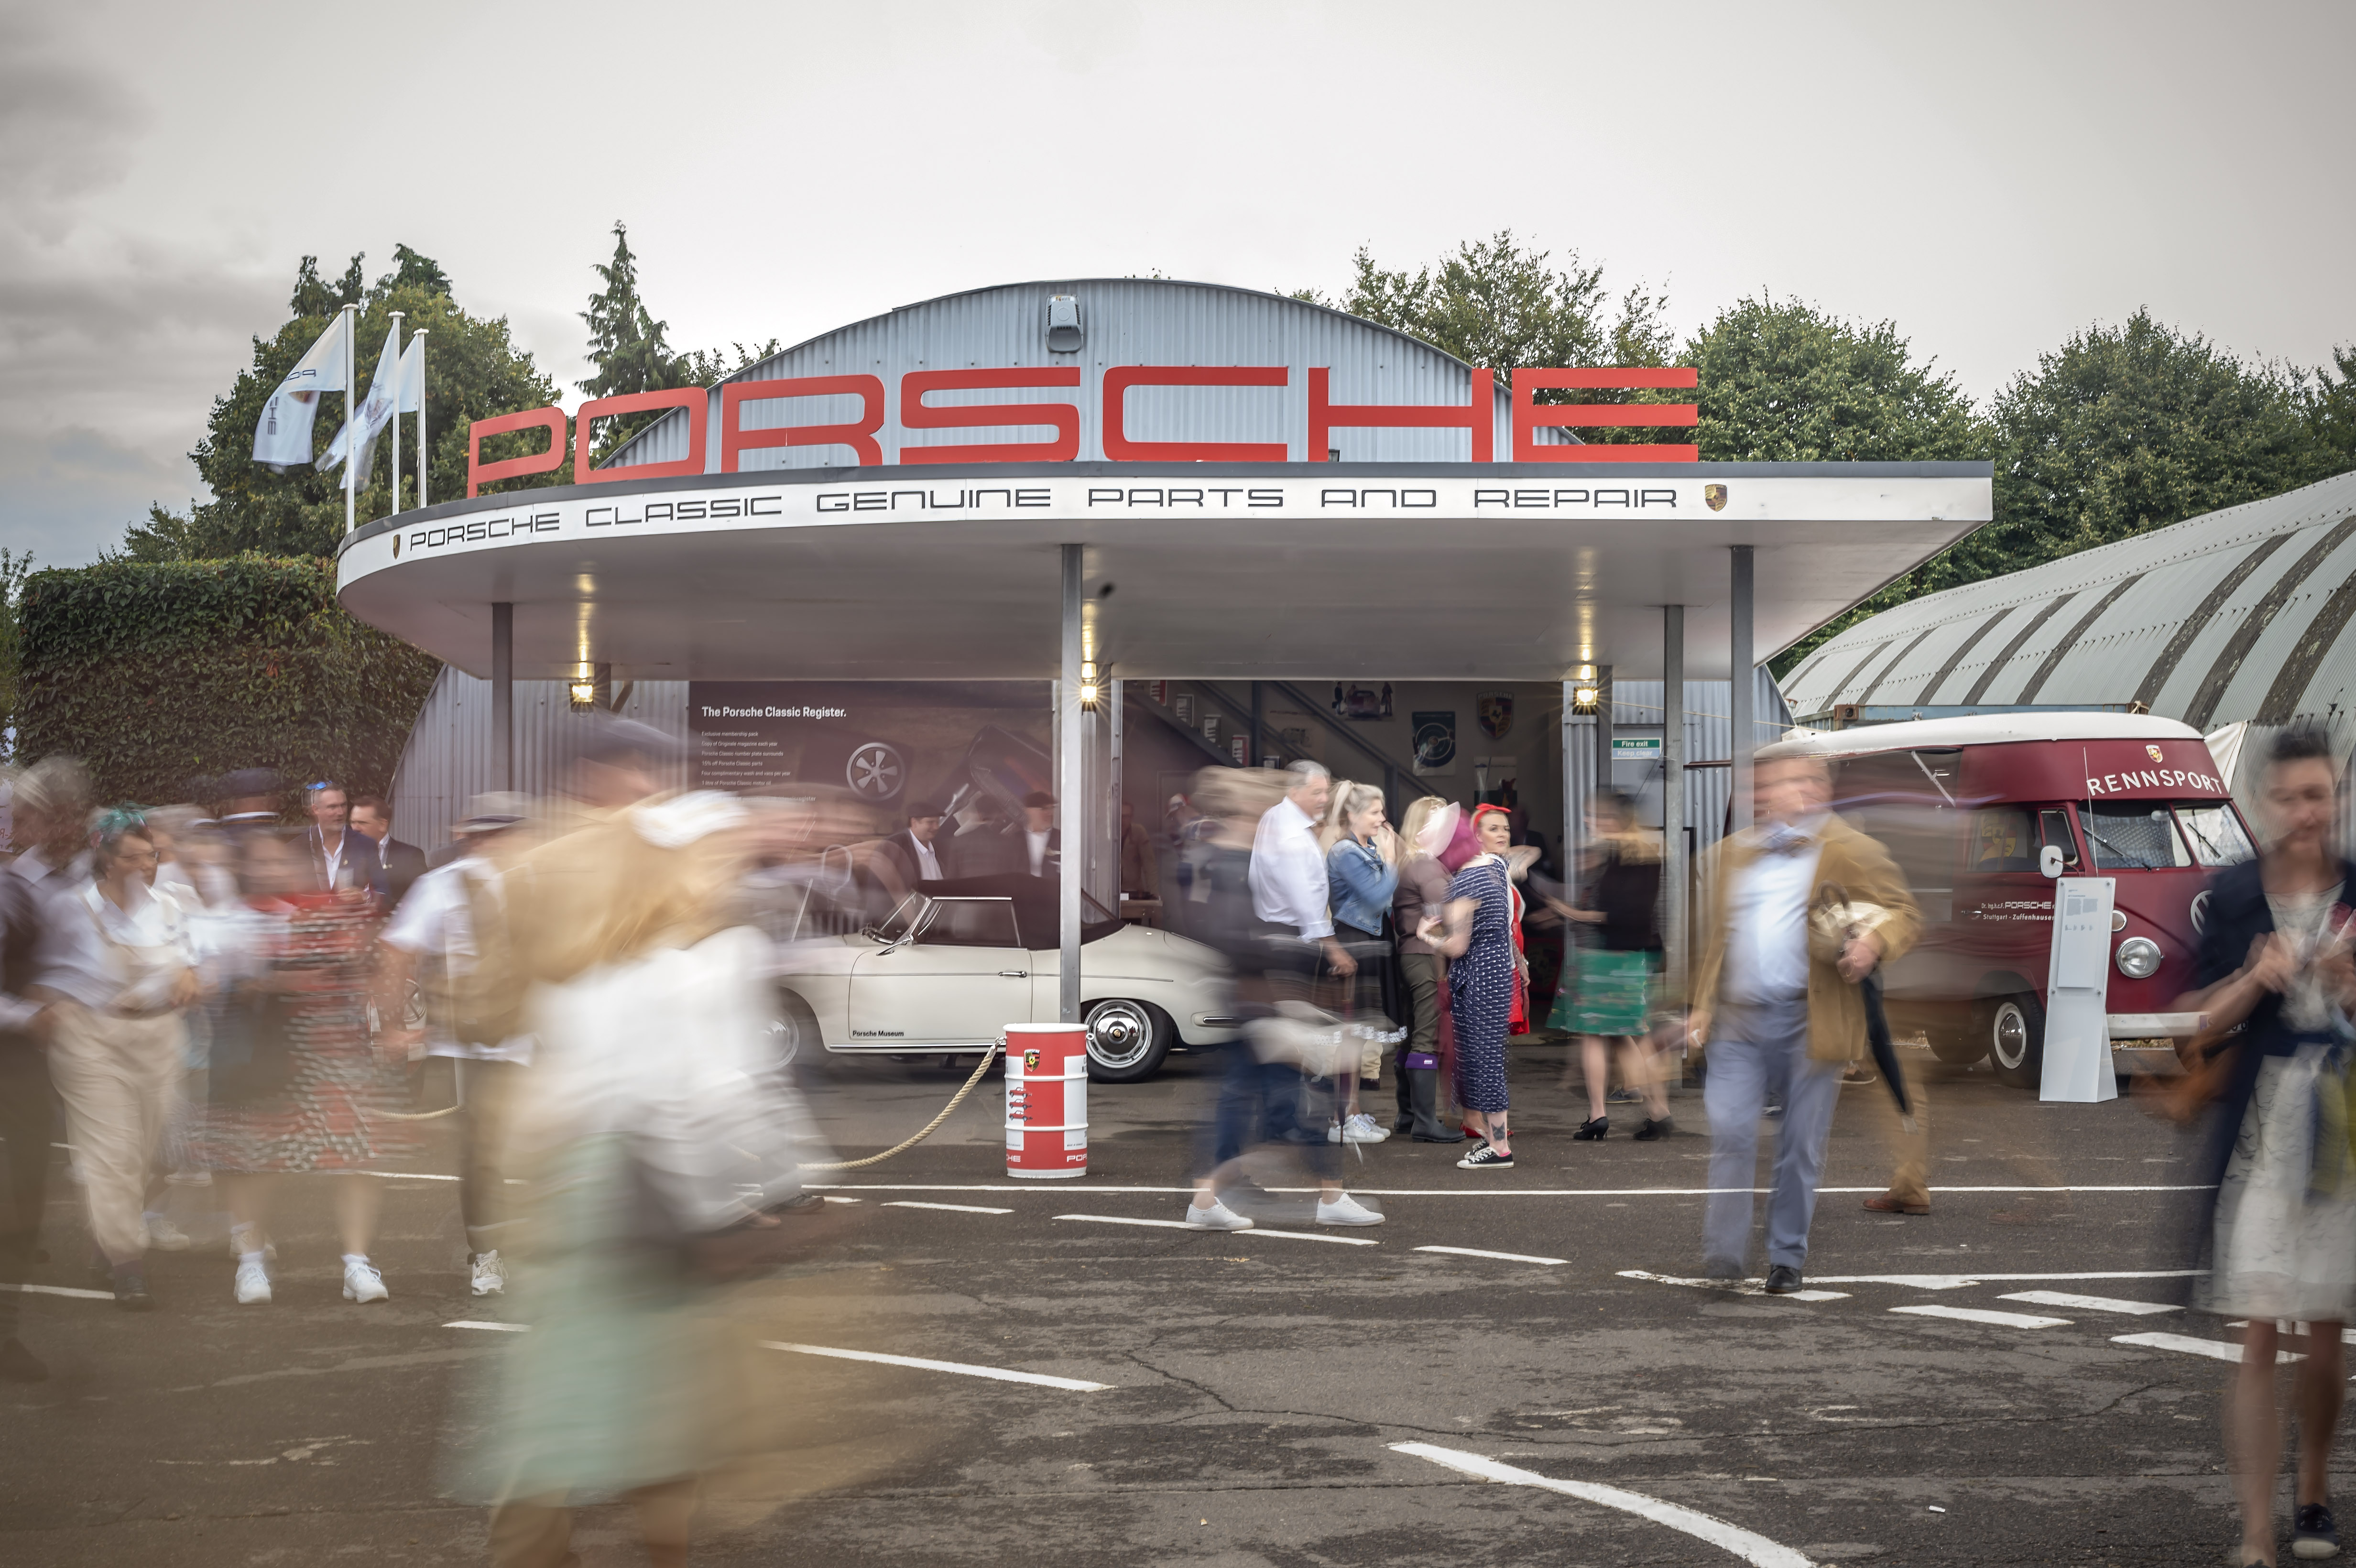 People outside Porsche stand at Goodwood Revival event